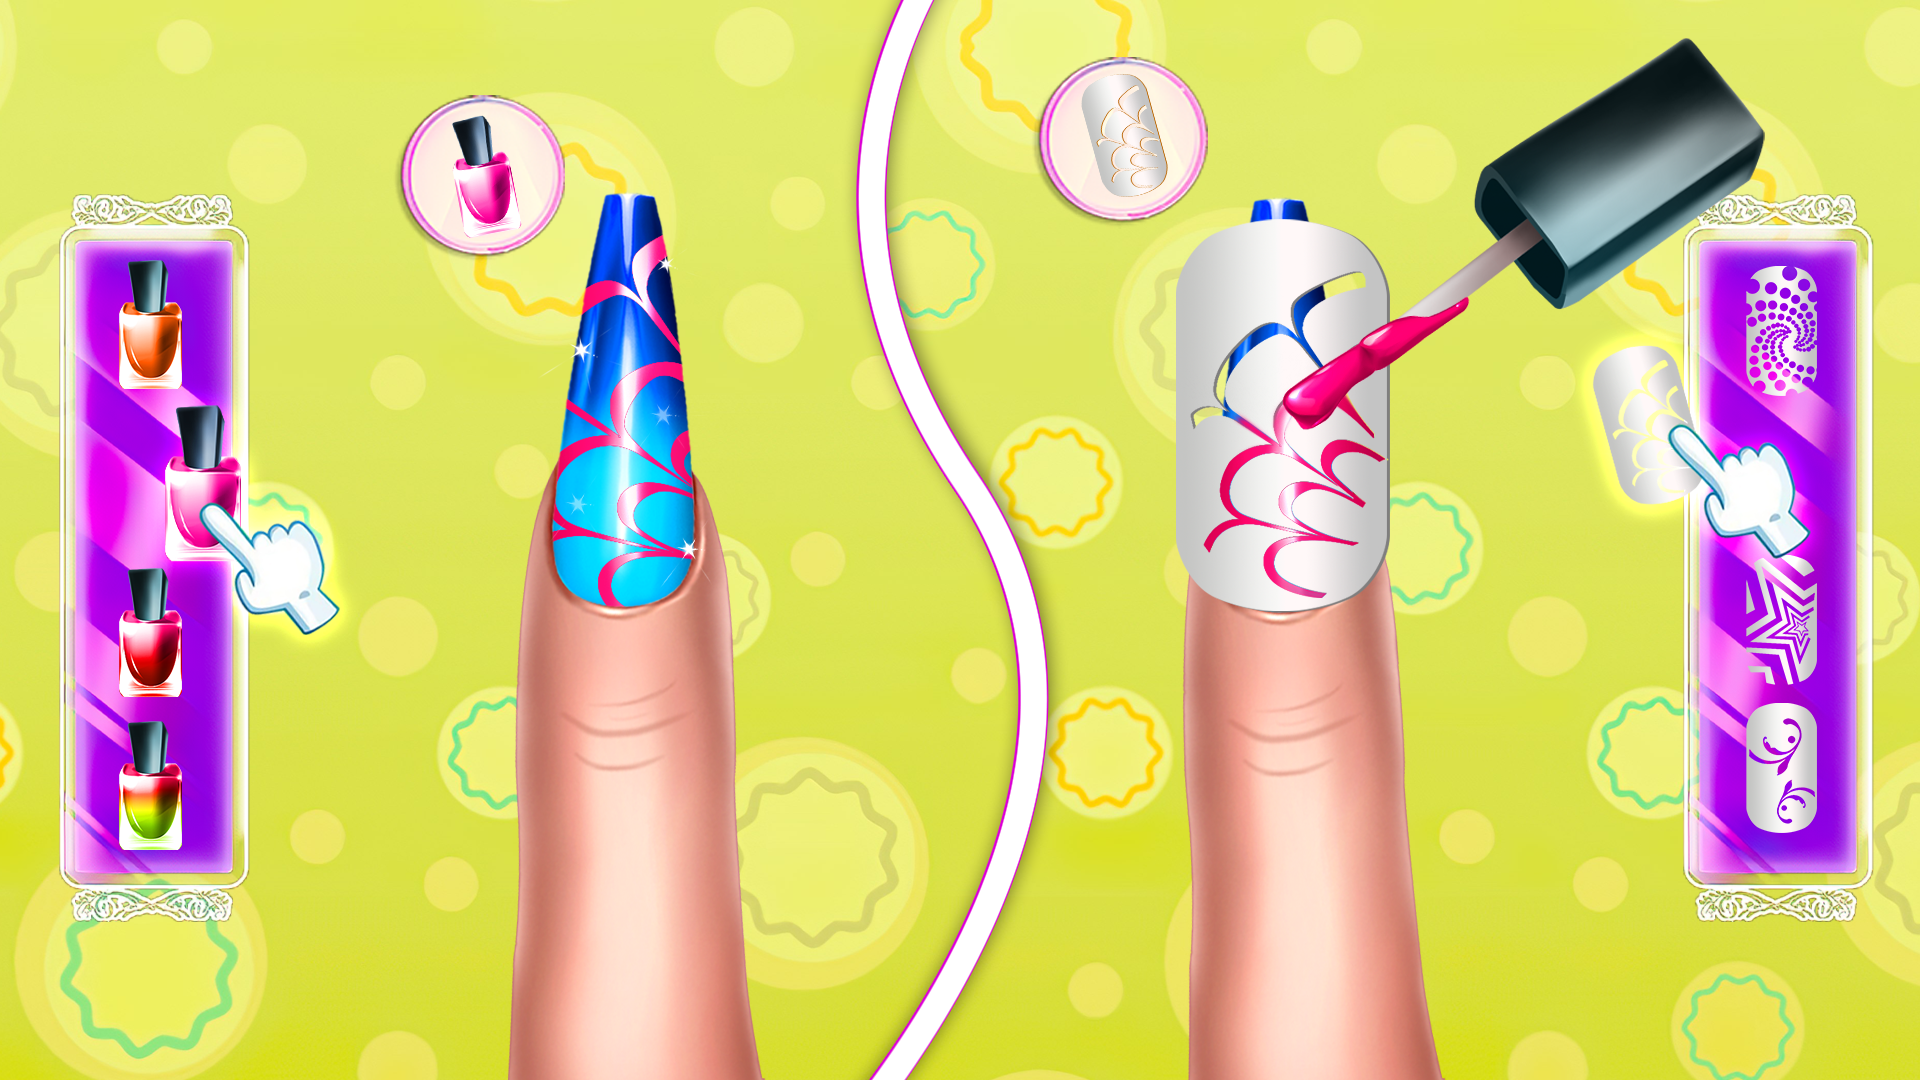 Nail Polish Spa Salon Games For Kids | Android Only - YouTube